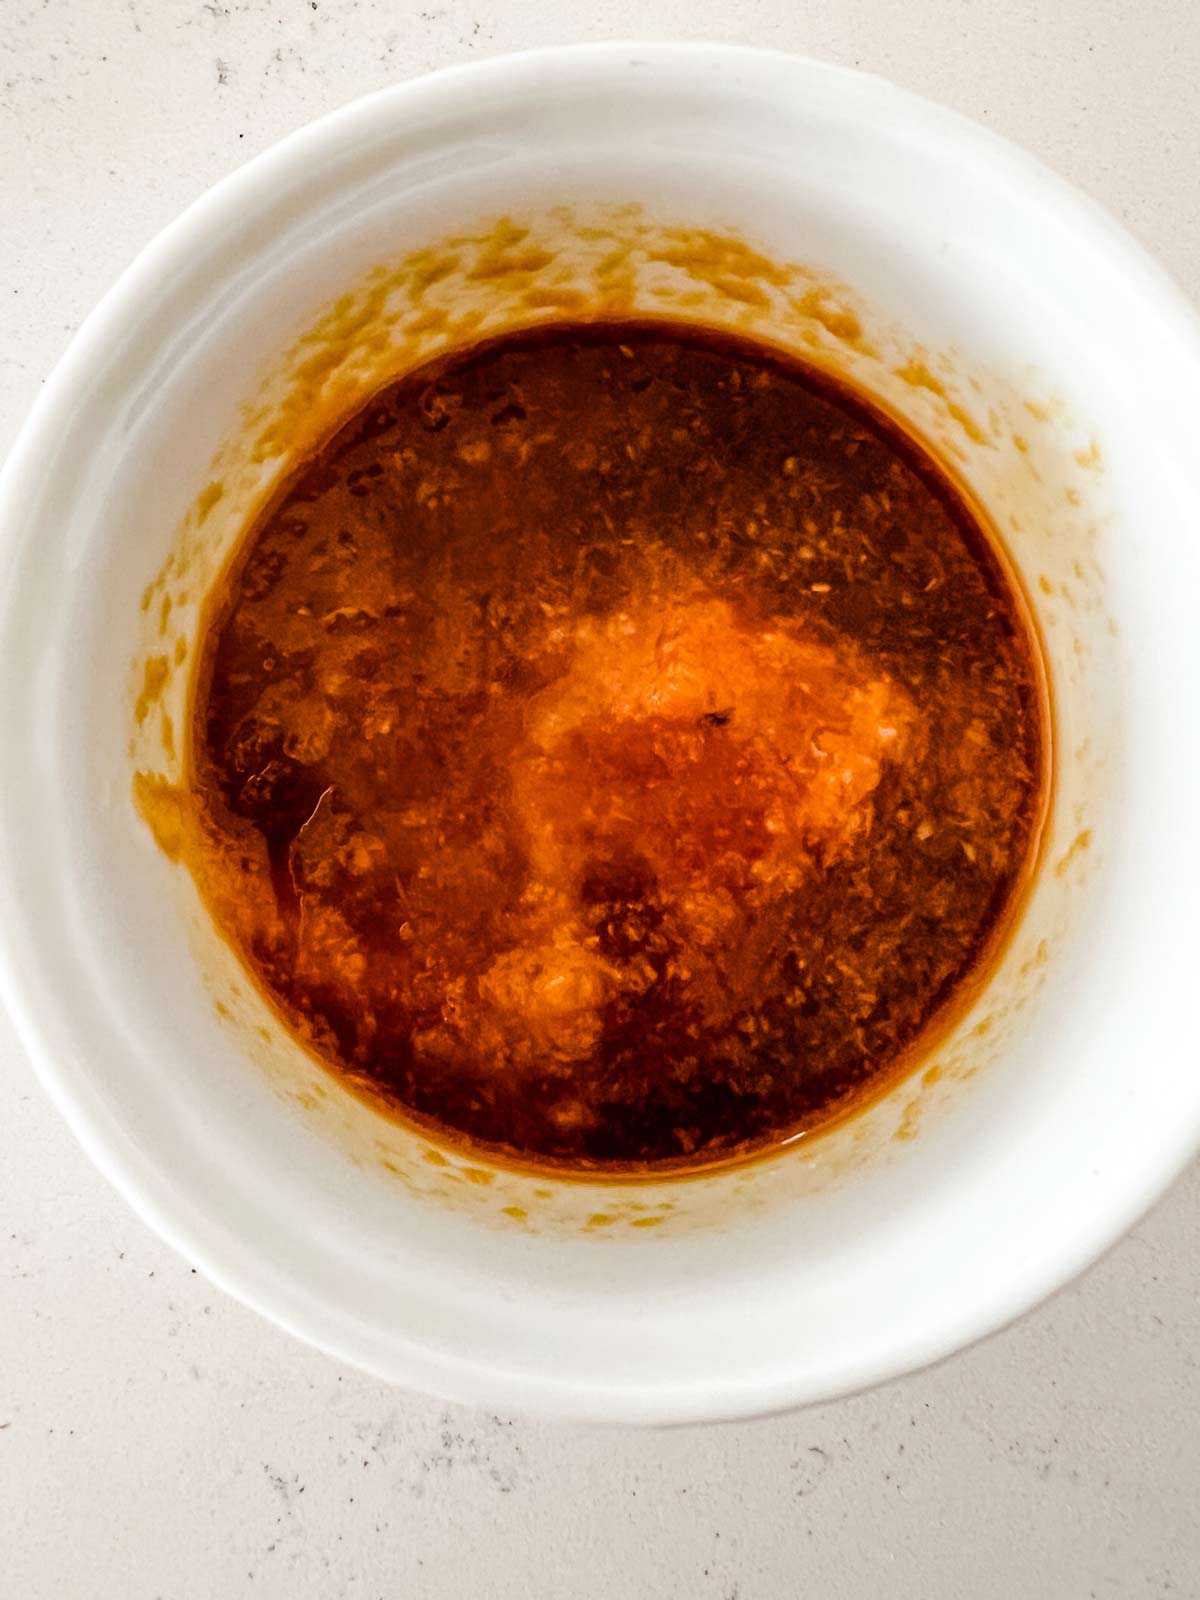 Soy sauce mixture in a white bowl.